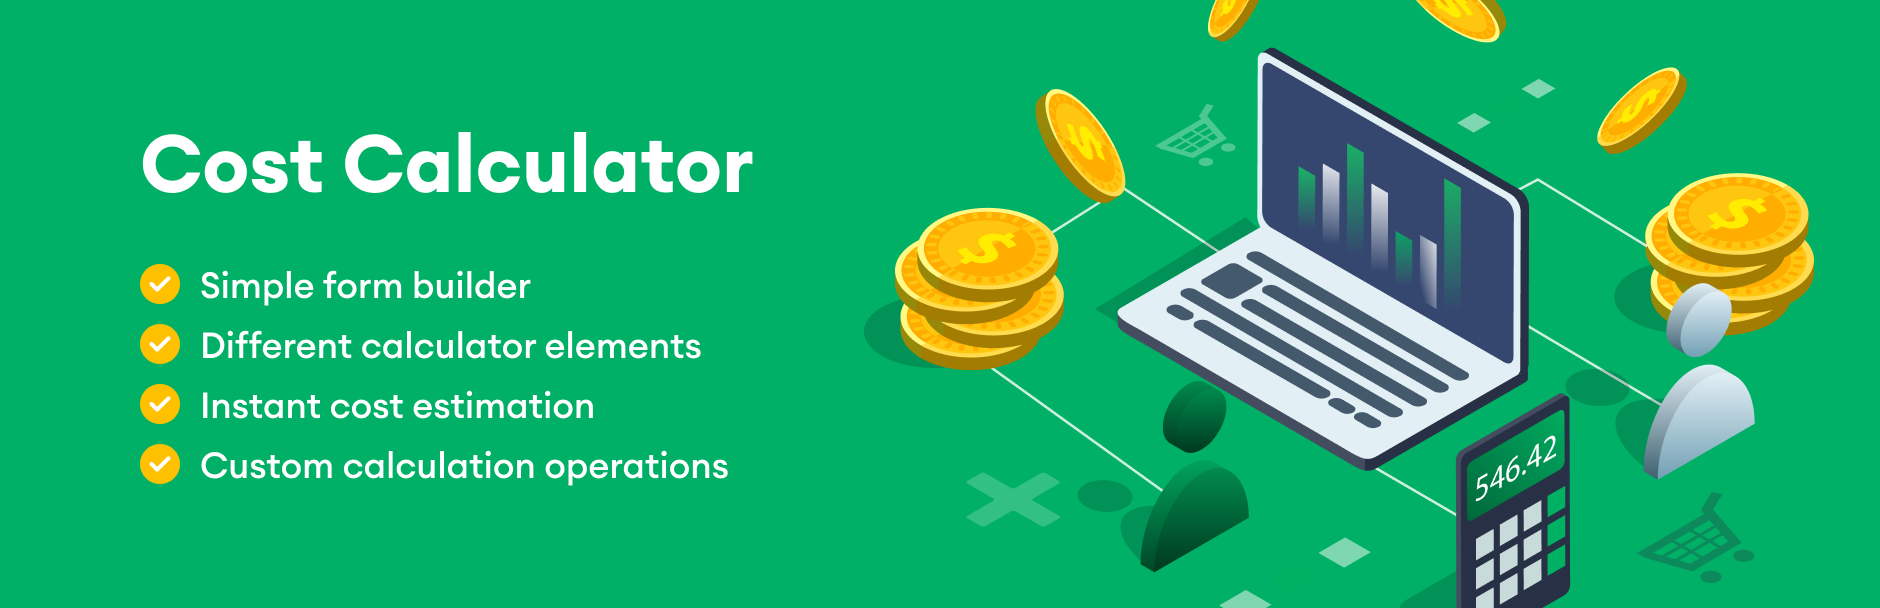 Cost Calculator Builder PRO - Cost Calculator Builder PRO v3.1.69 by Stylemixthemes Nulled Free Download